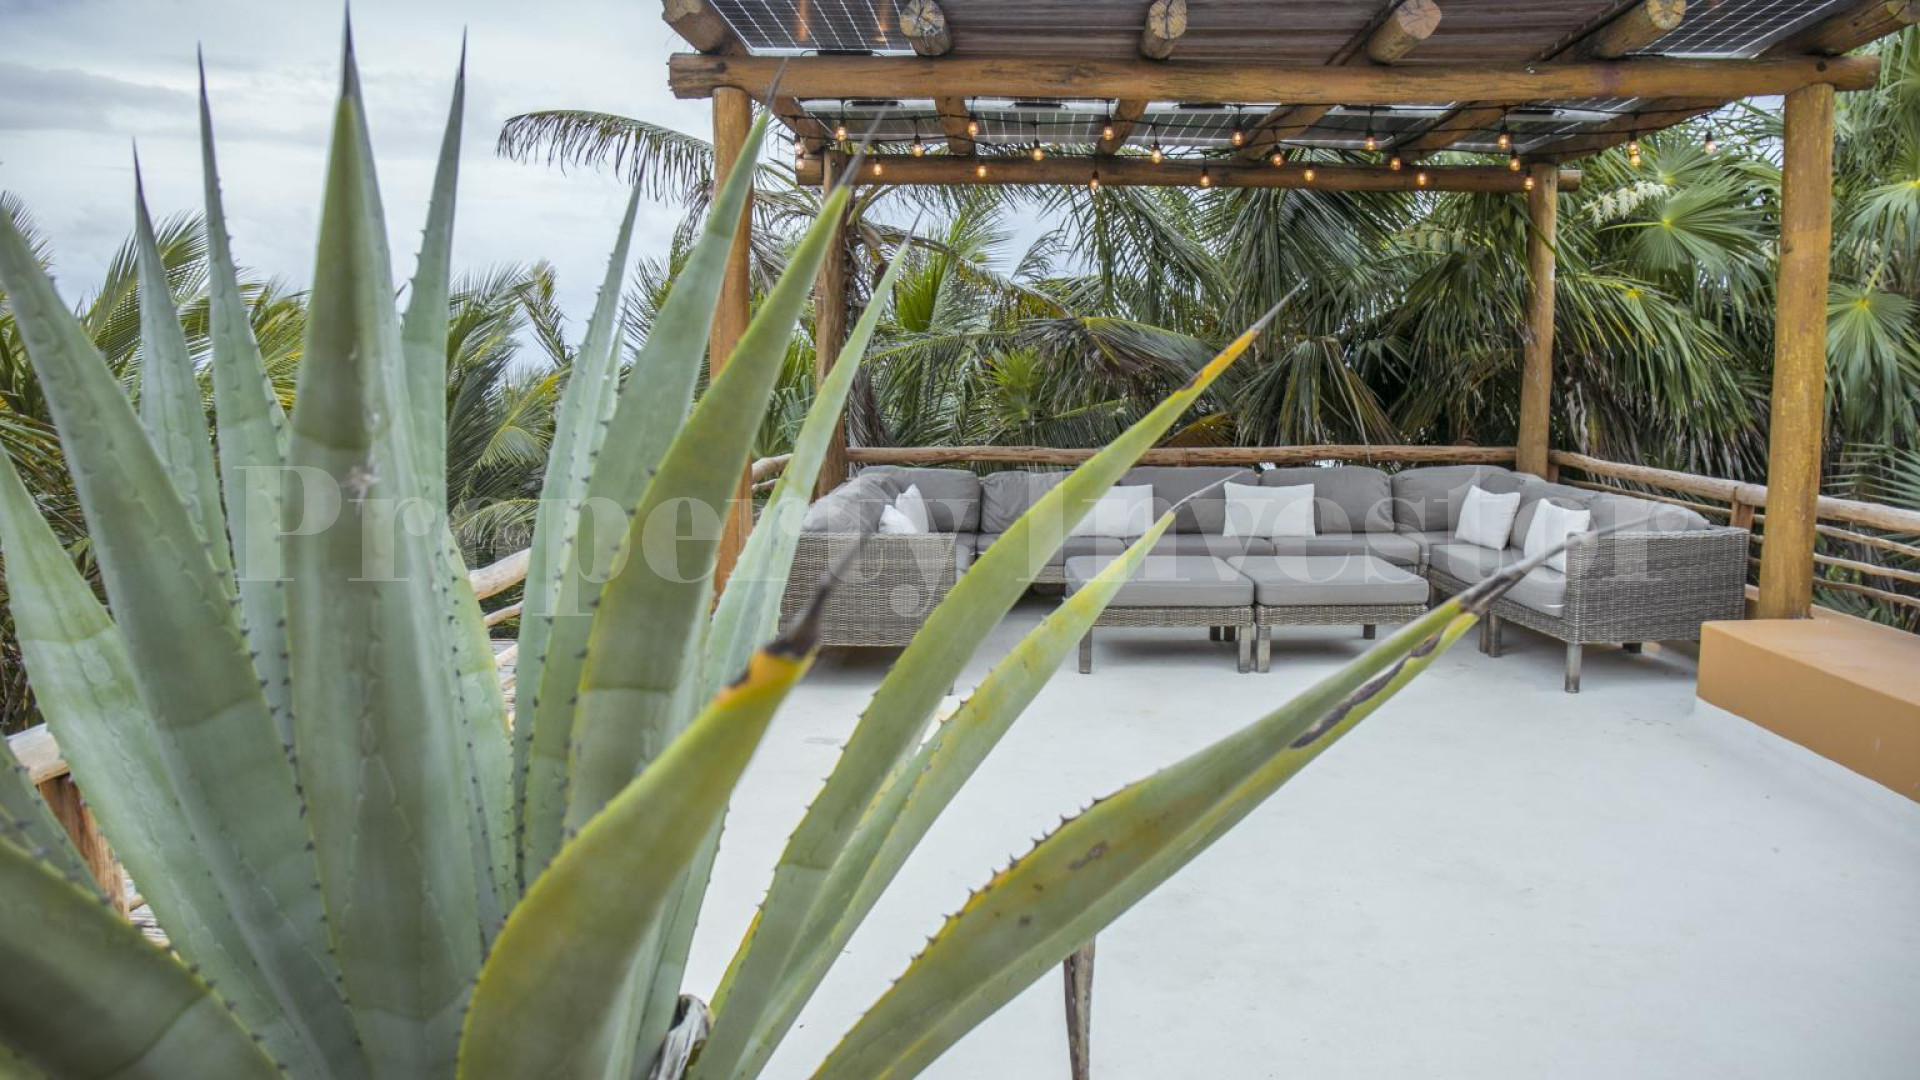 One-of-a-Kind 5 Bedroom Luxury Secluded Beachfront Eco Villa in the Sian Ka'an Biosphere Reserve, Tulum, Mexico